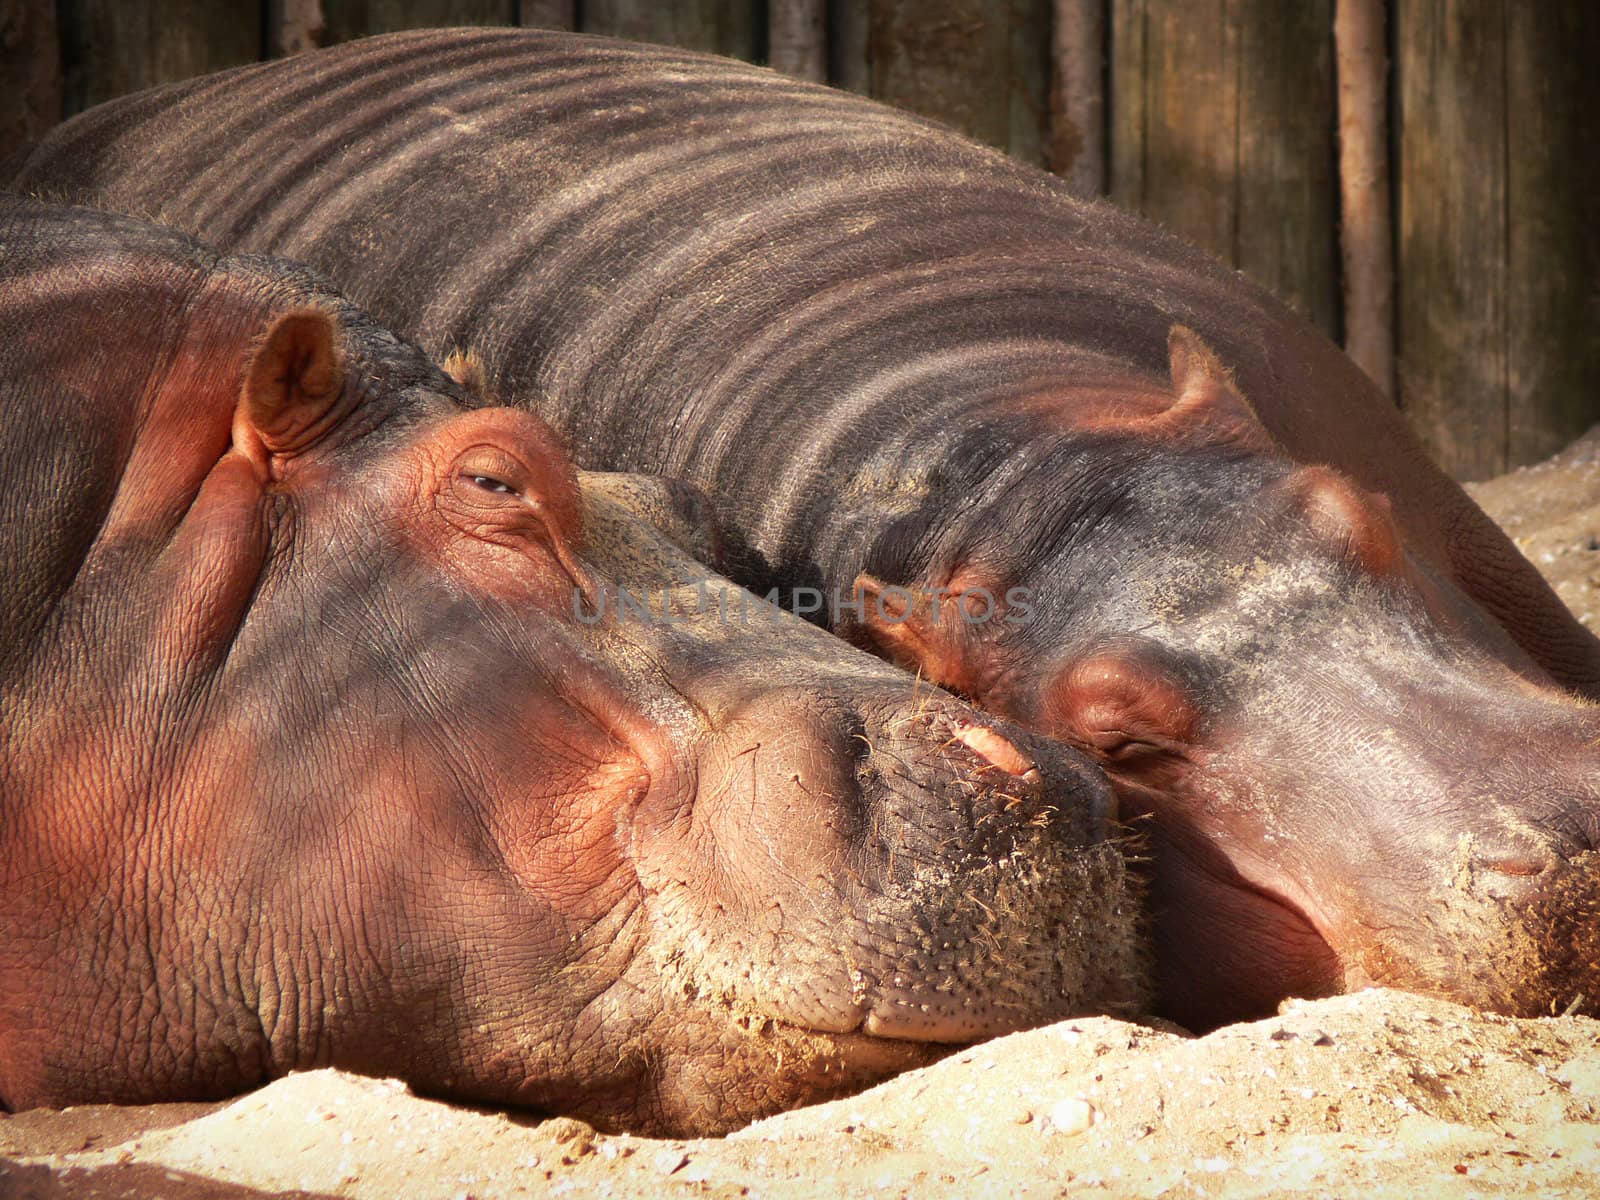 A couple of hippos taking a nap